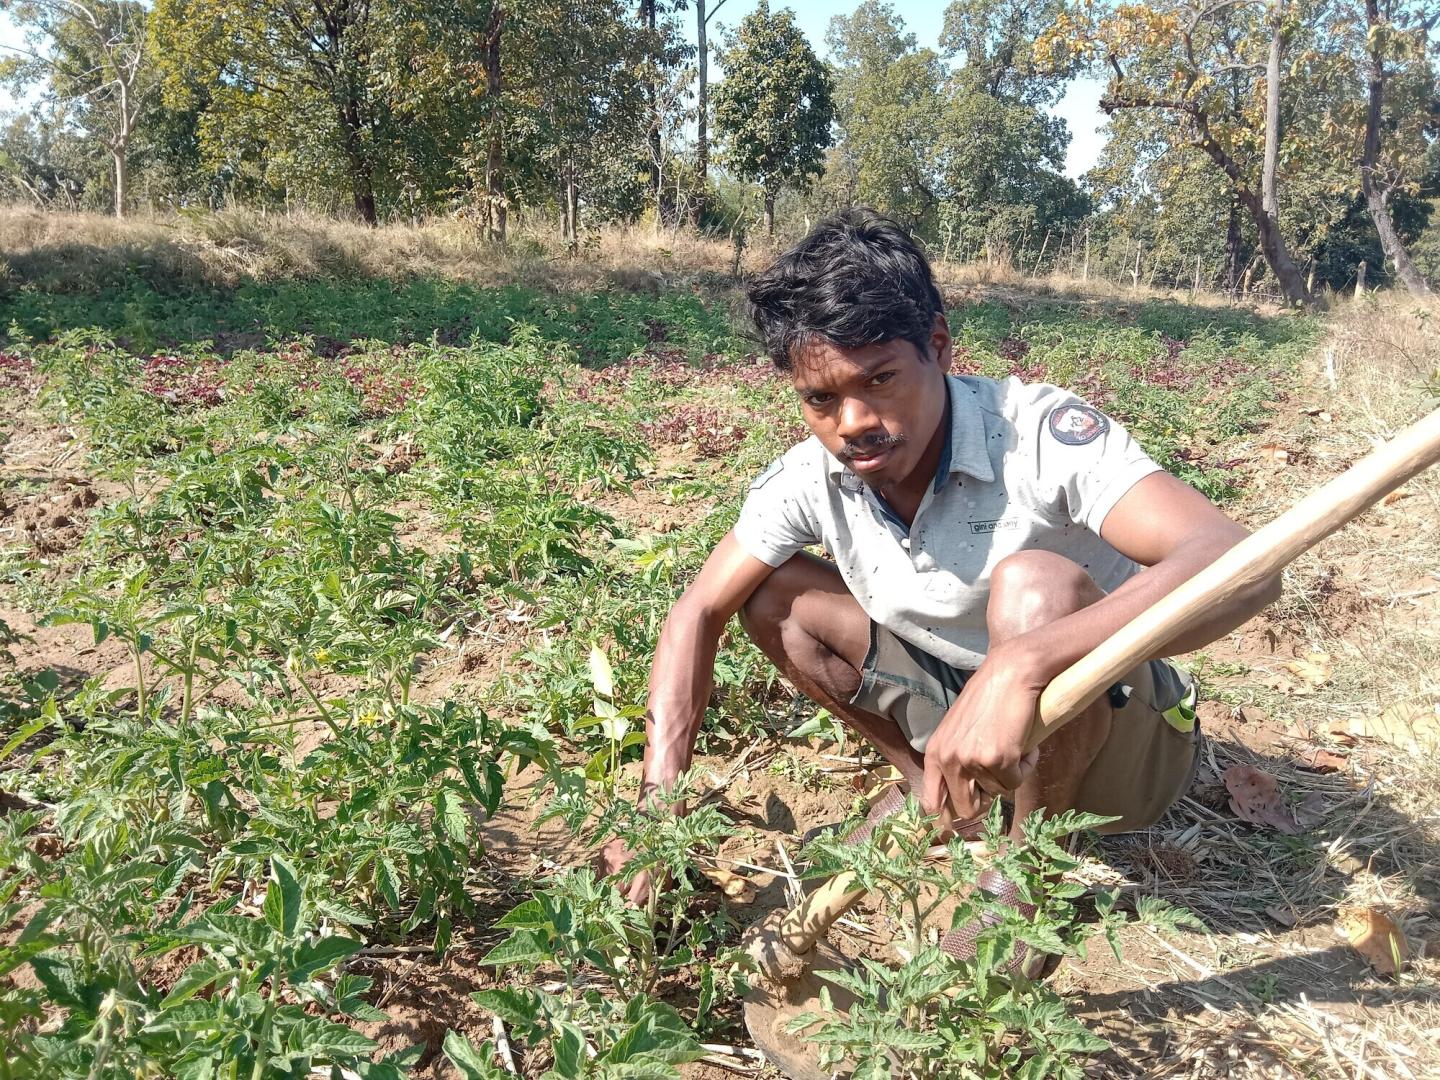 A farmer squats in his field in India. He is holding a hoe.